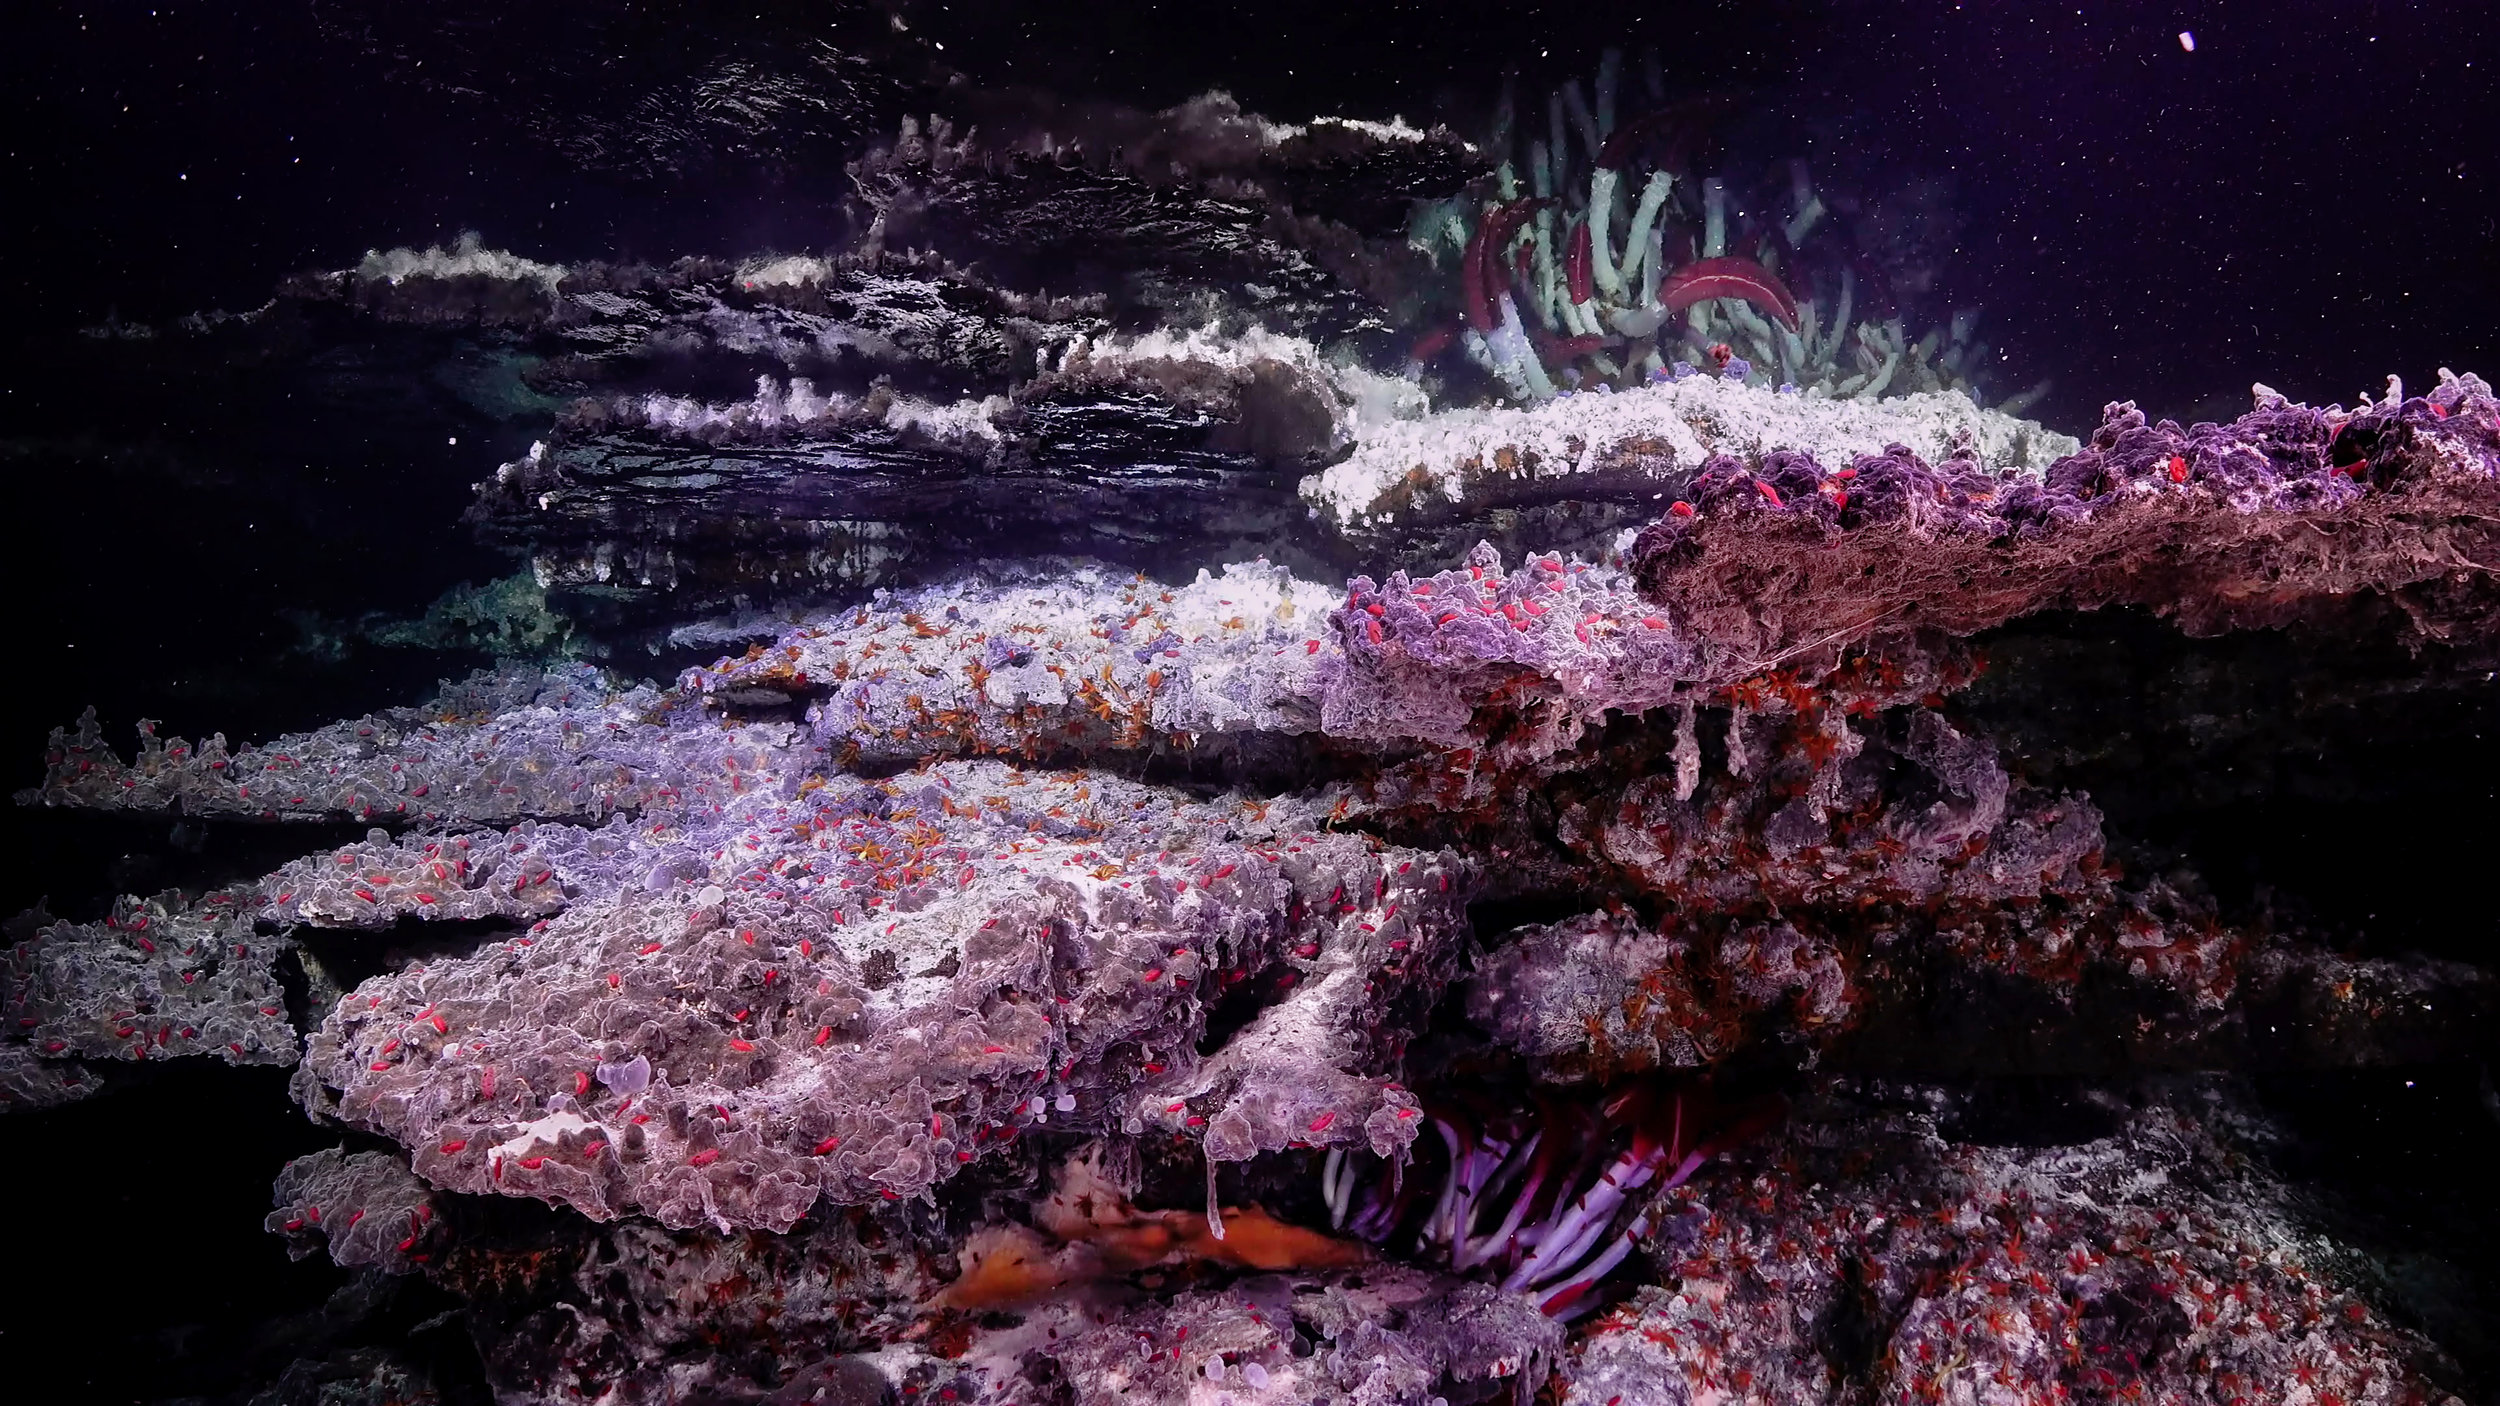 A spectacular hydrothermal vent structure in the Gulf of California.  (Image courtesy of Schmidt Ocean Institute)